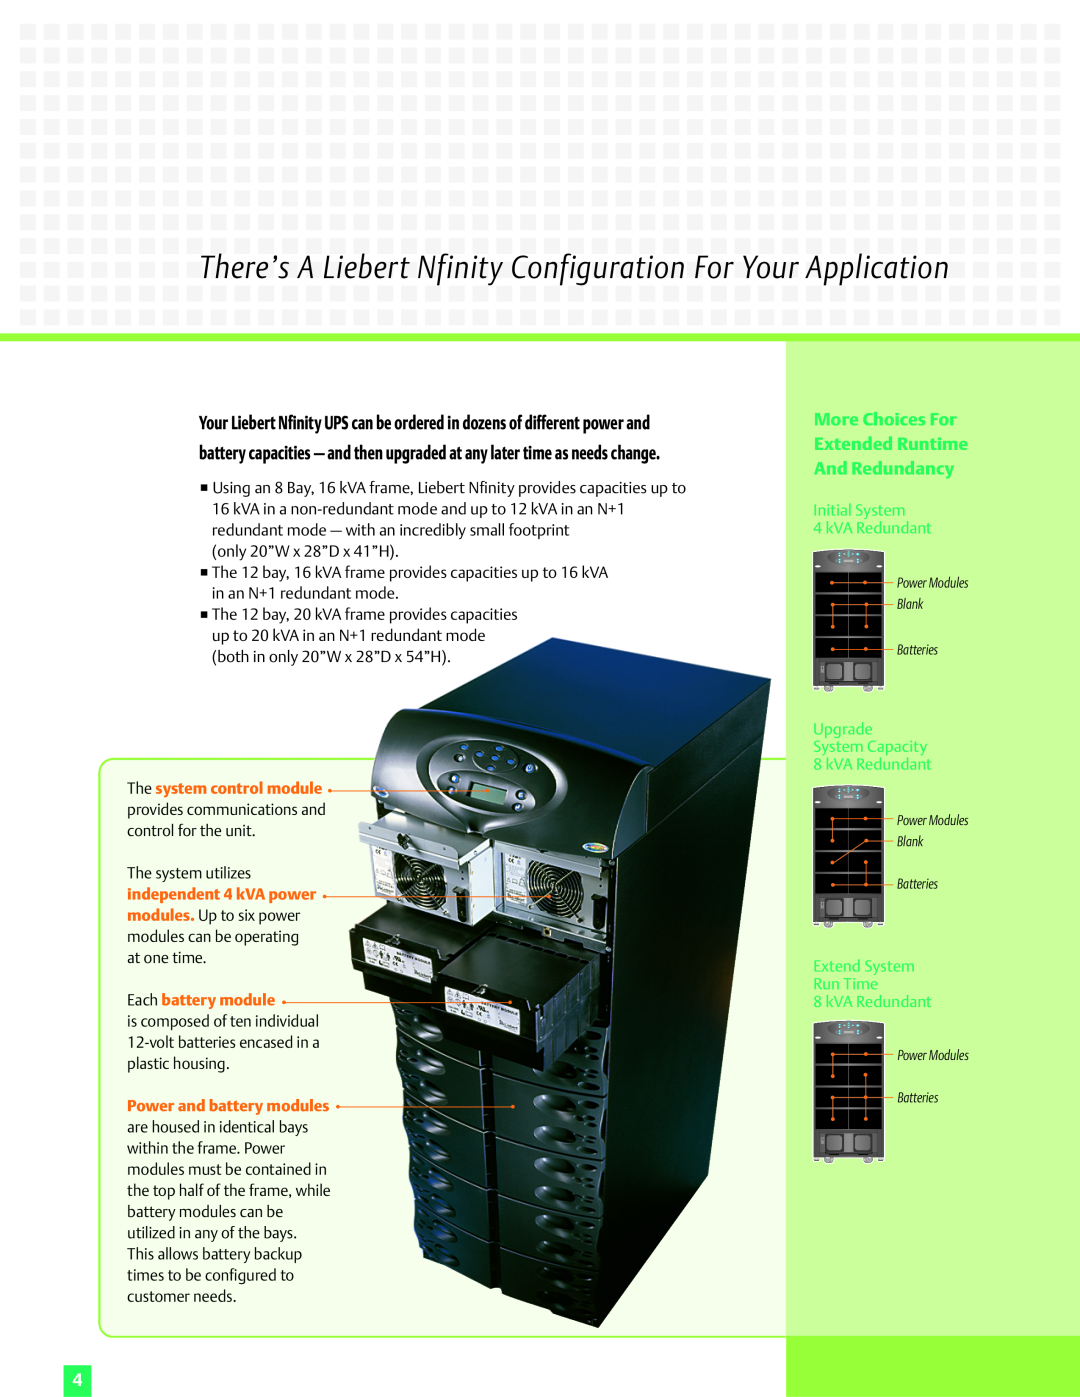 Emerson 4-16kVA There’s A Liebert Nfinity Configuration For Your Application, independent 4 kVA power, Each battery module 